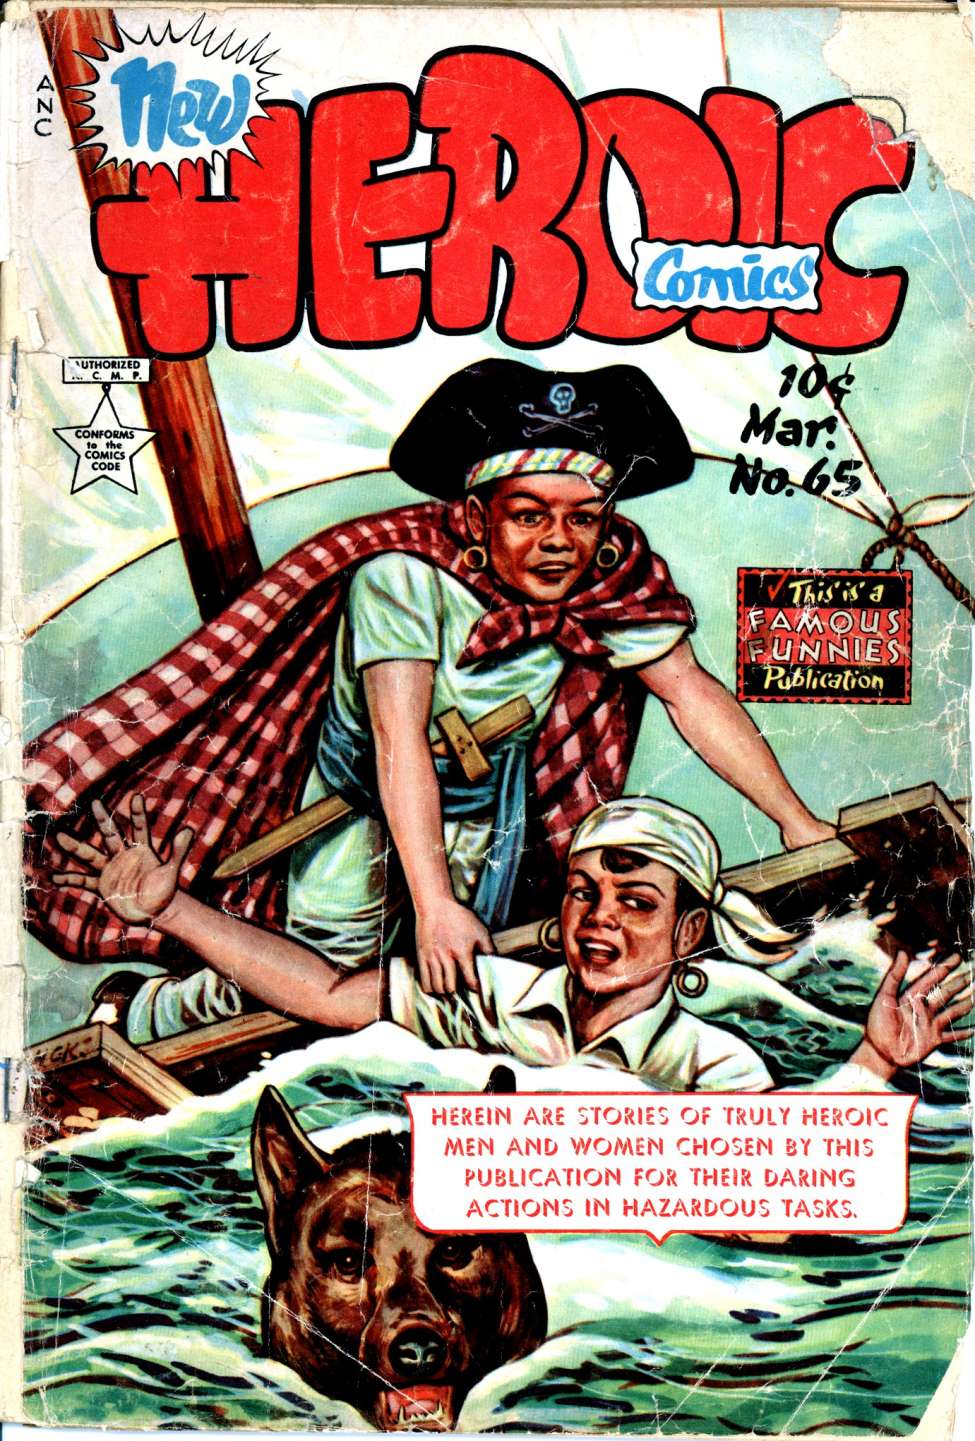 Comic Book Cover For New Heroic Comics 65 - Version 1